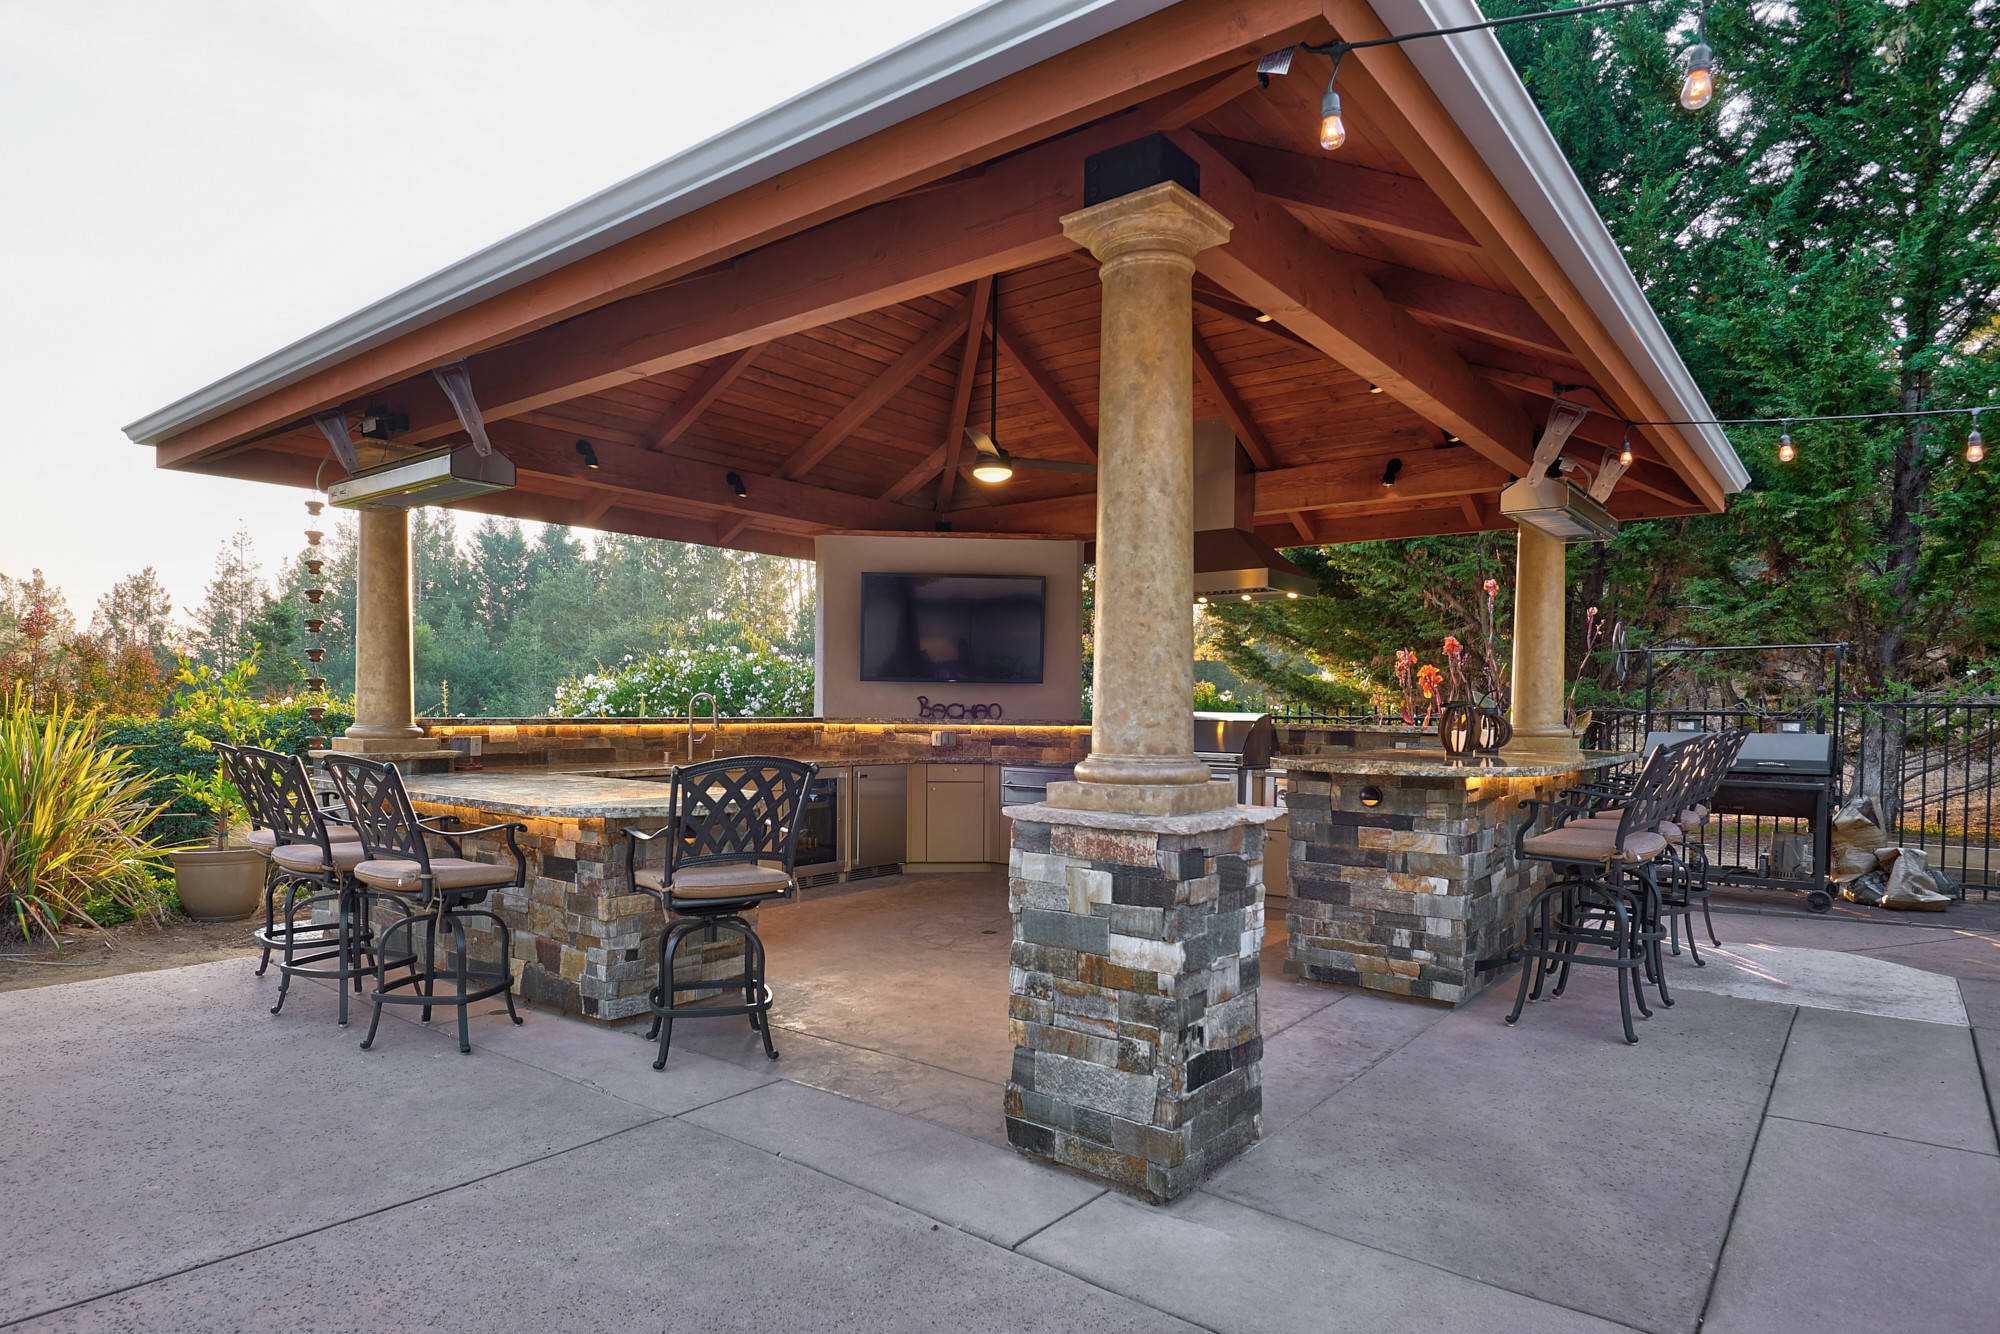 75 Outdoor Kitchen with a Gazebo Ideas You'll Love - March, 2023 | Houzz